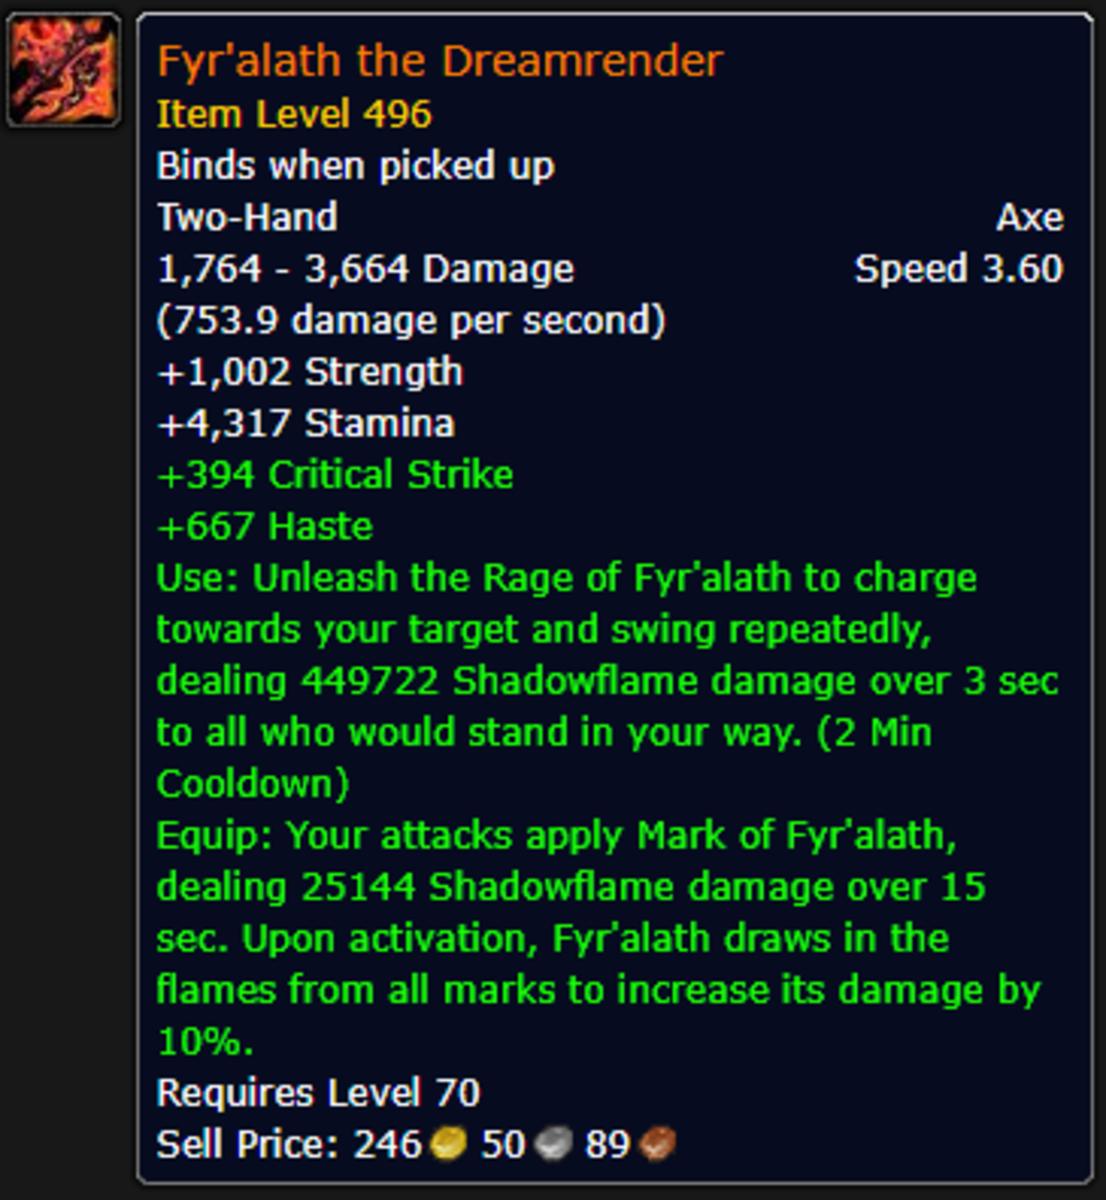 Stat Block for Fyr'alath, the Dreamrender, the Legendary weapon from the Amidrassil Raid in World of Warcraft: Dragonflight.